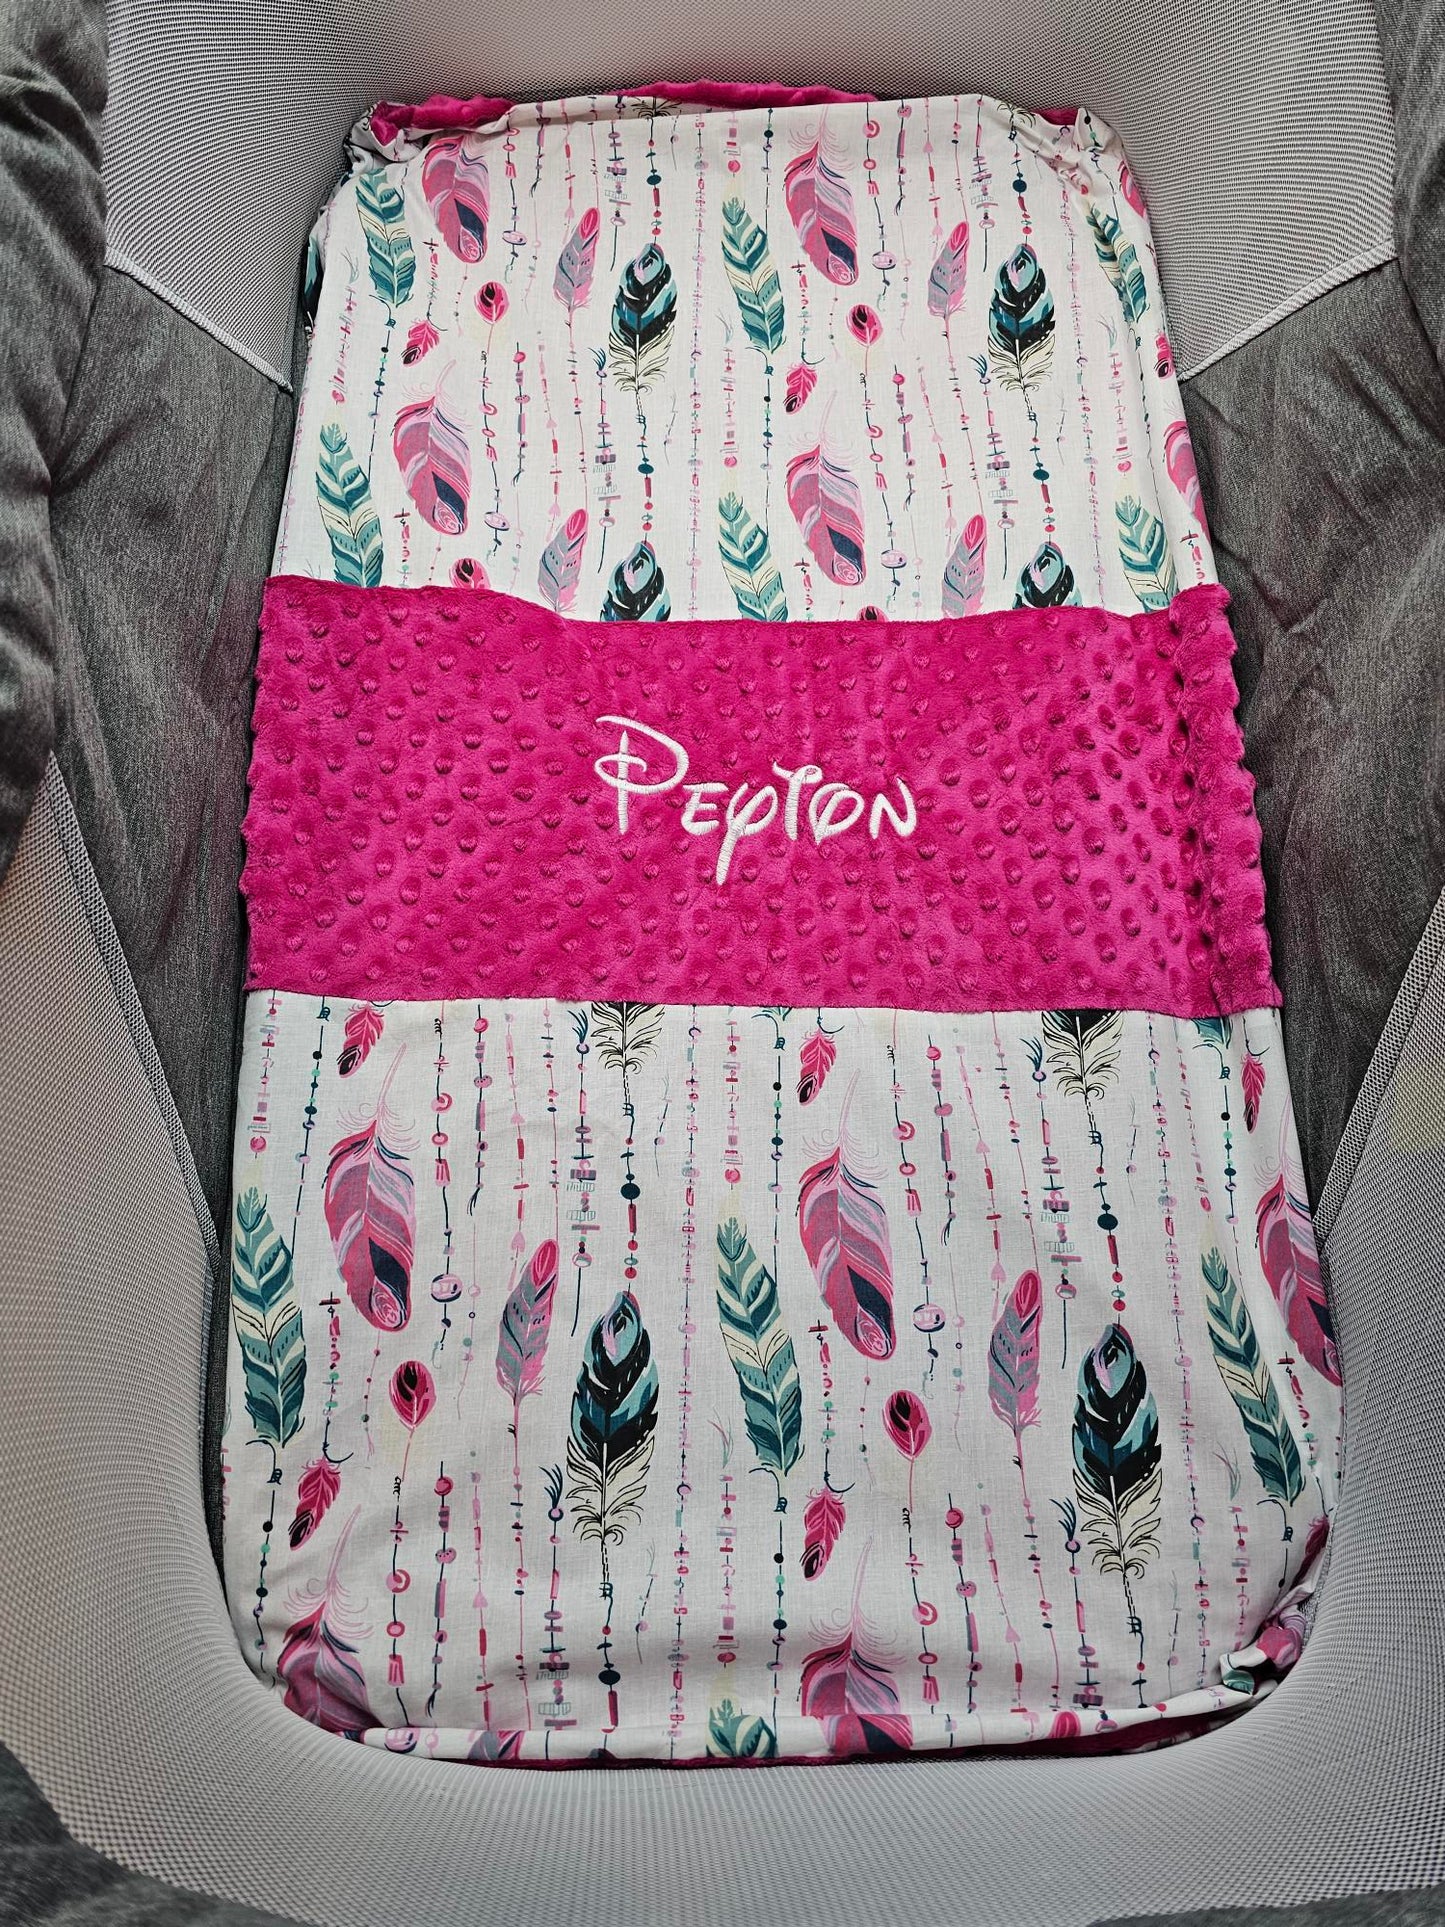 Girl Blanket | Model 2 | 70x95cm | Cotton and Minky | To personalize